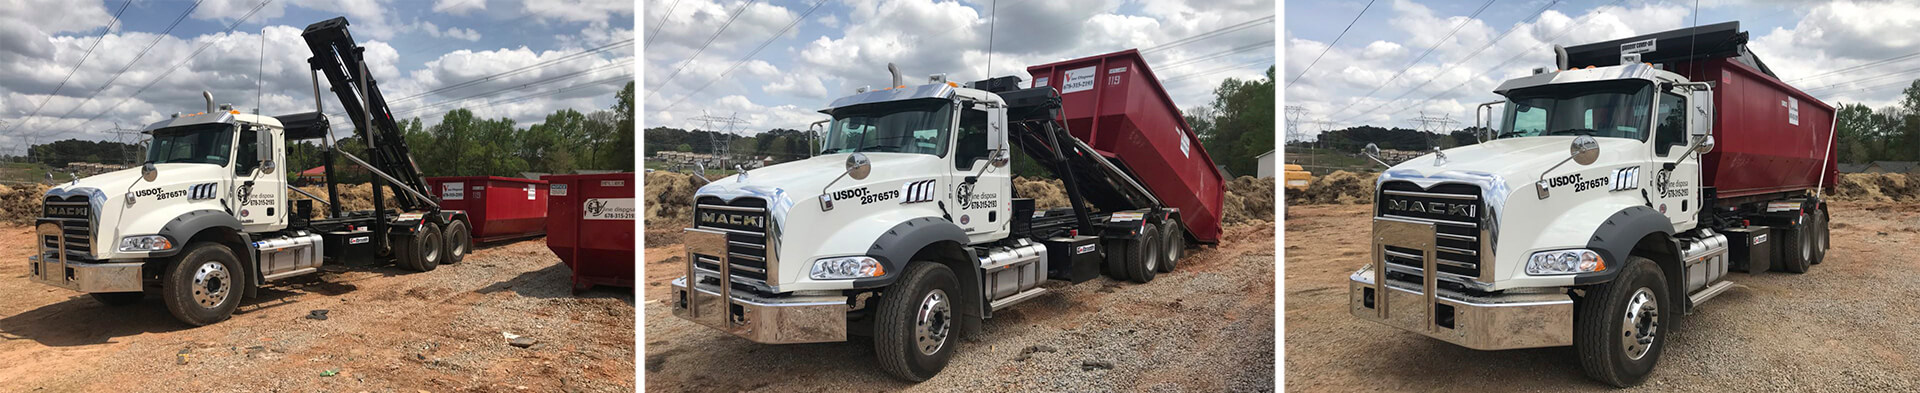 Commercial & Residential Dumpster Rentals in Midland